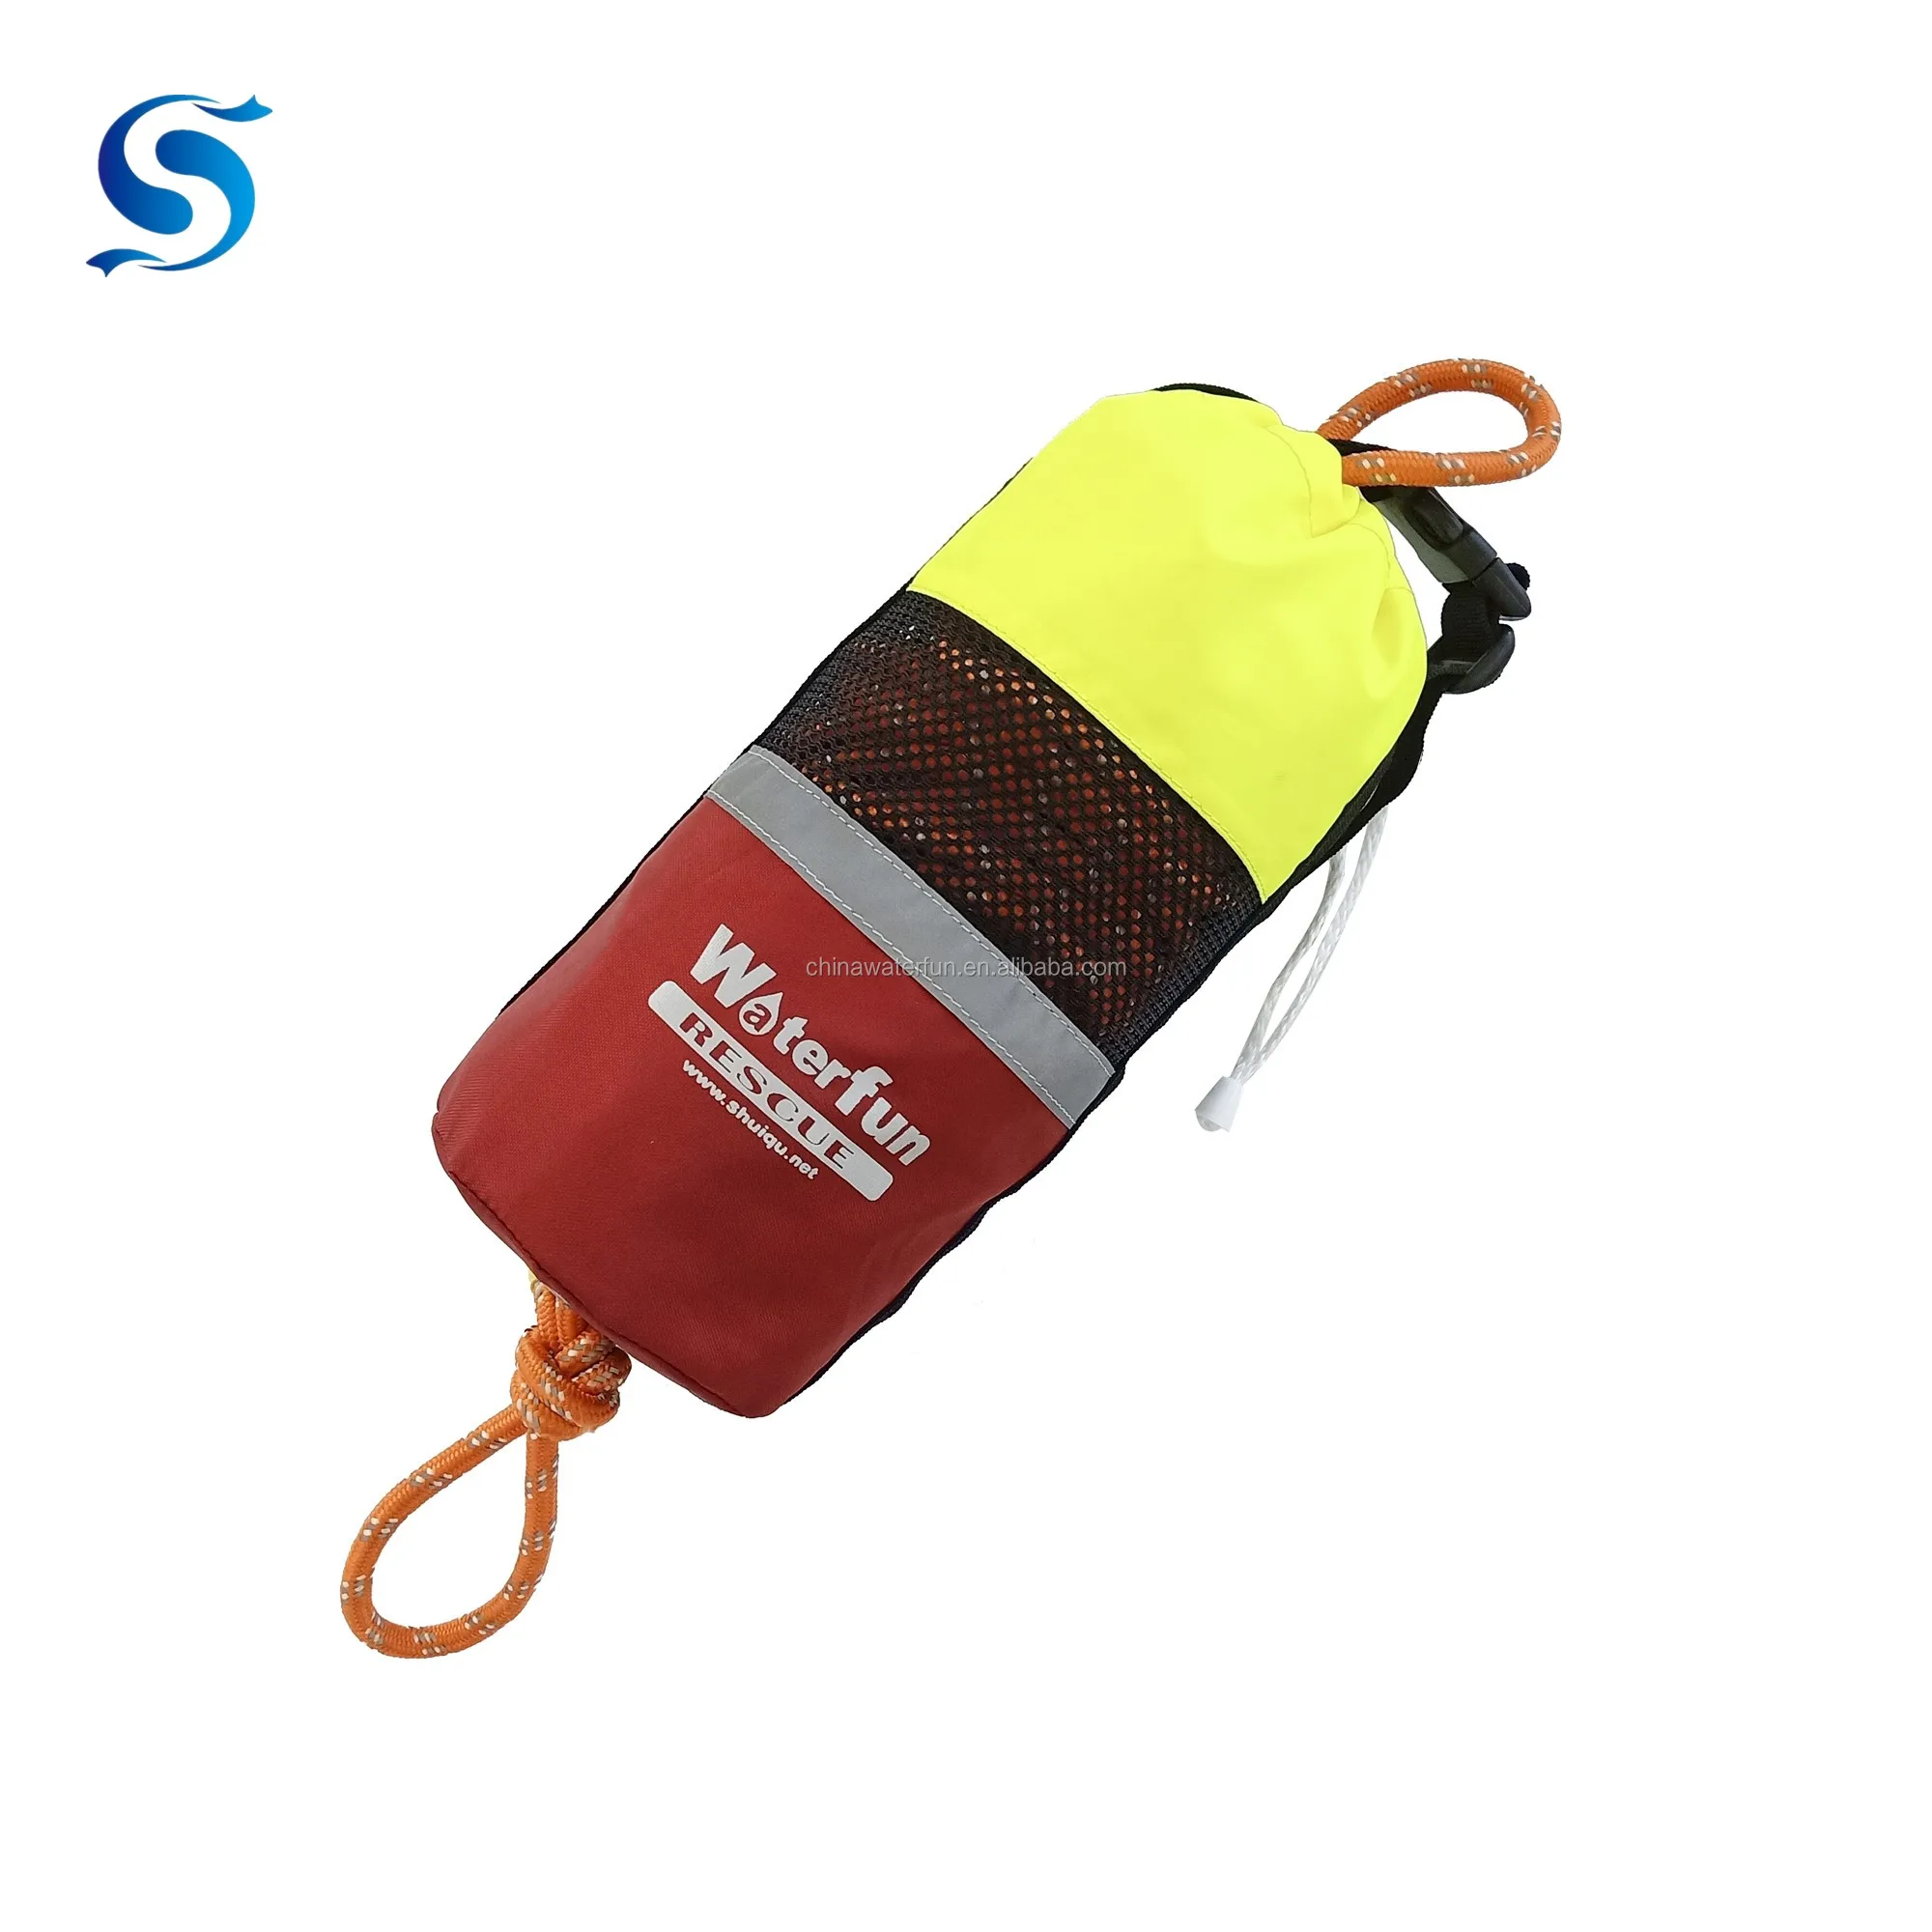 
Strong Throw Rope Bag Factory Provide Pro Compact Rescue Throw Rope Bag with 20m Reflective Floatation Rope 